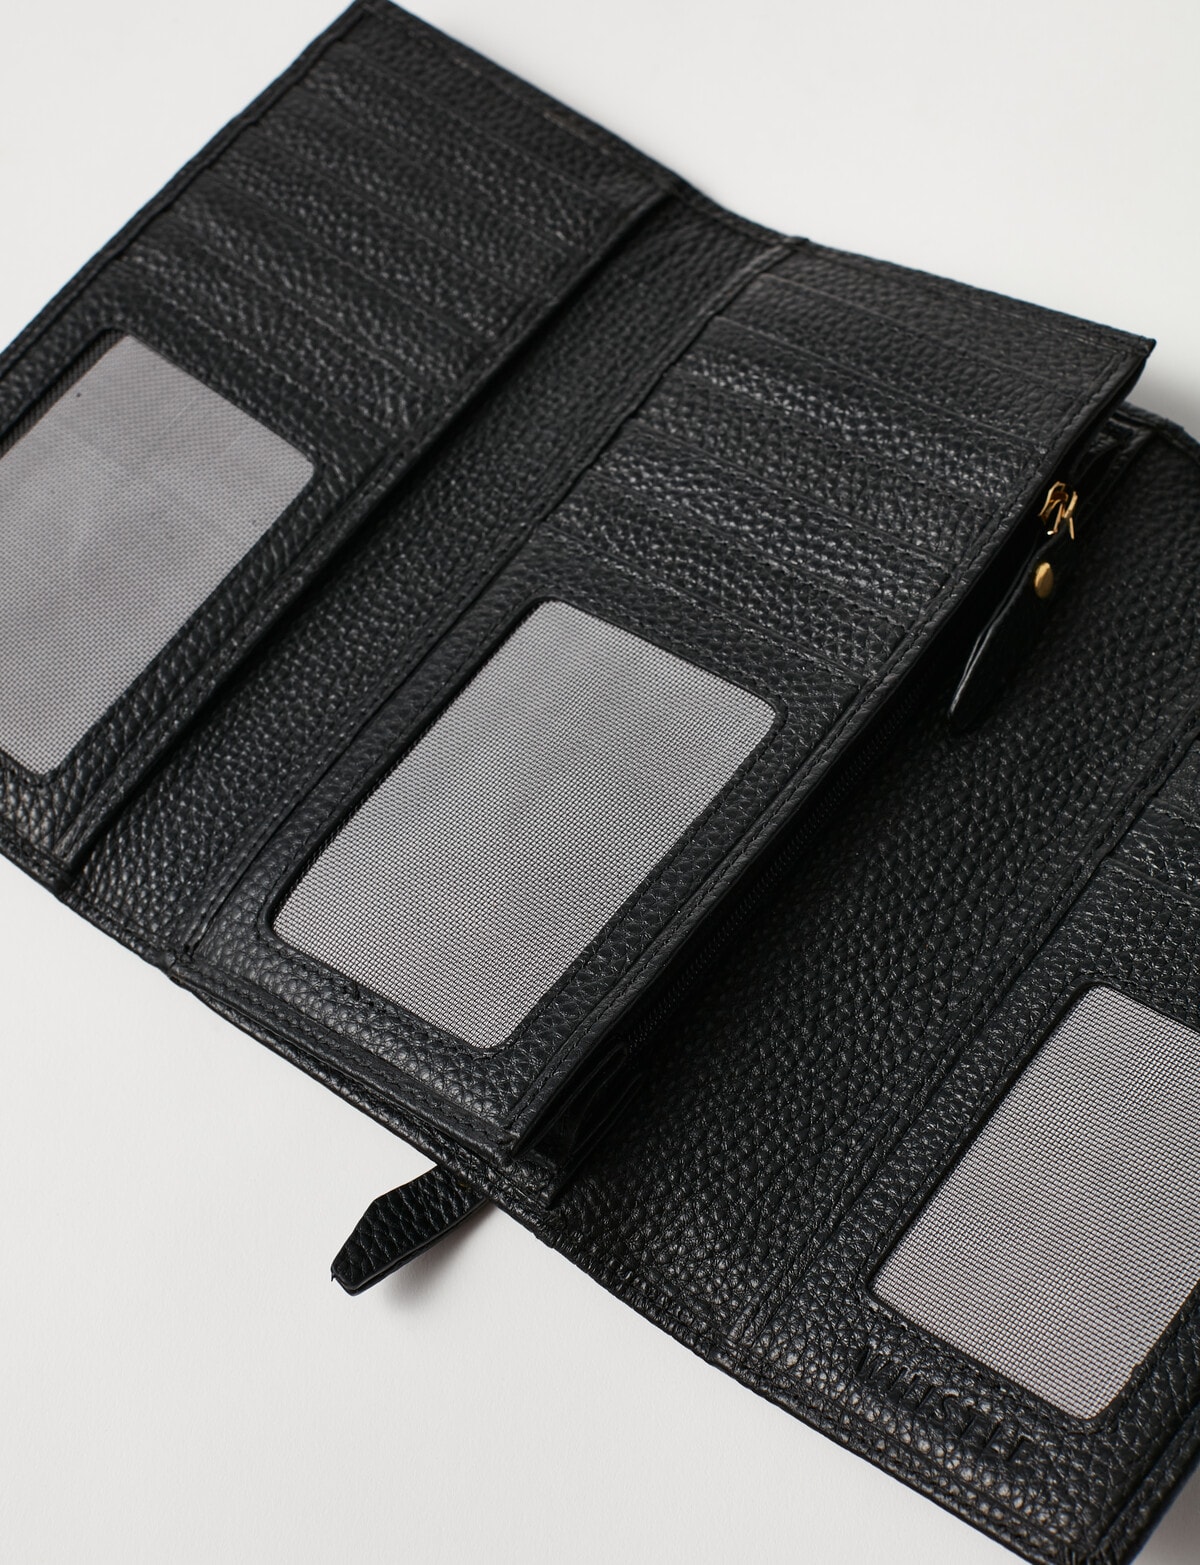 Whistle Leather Full Foldover Wallet, Black - Wallets